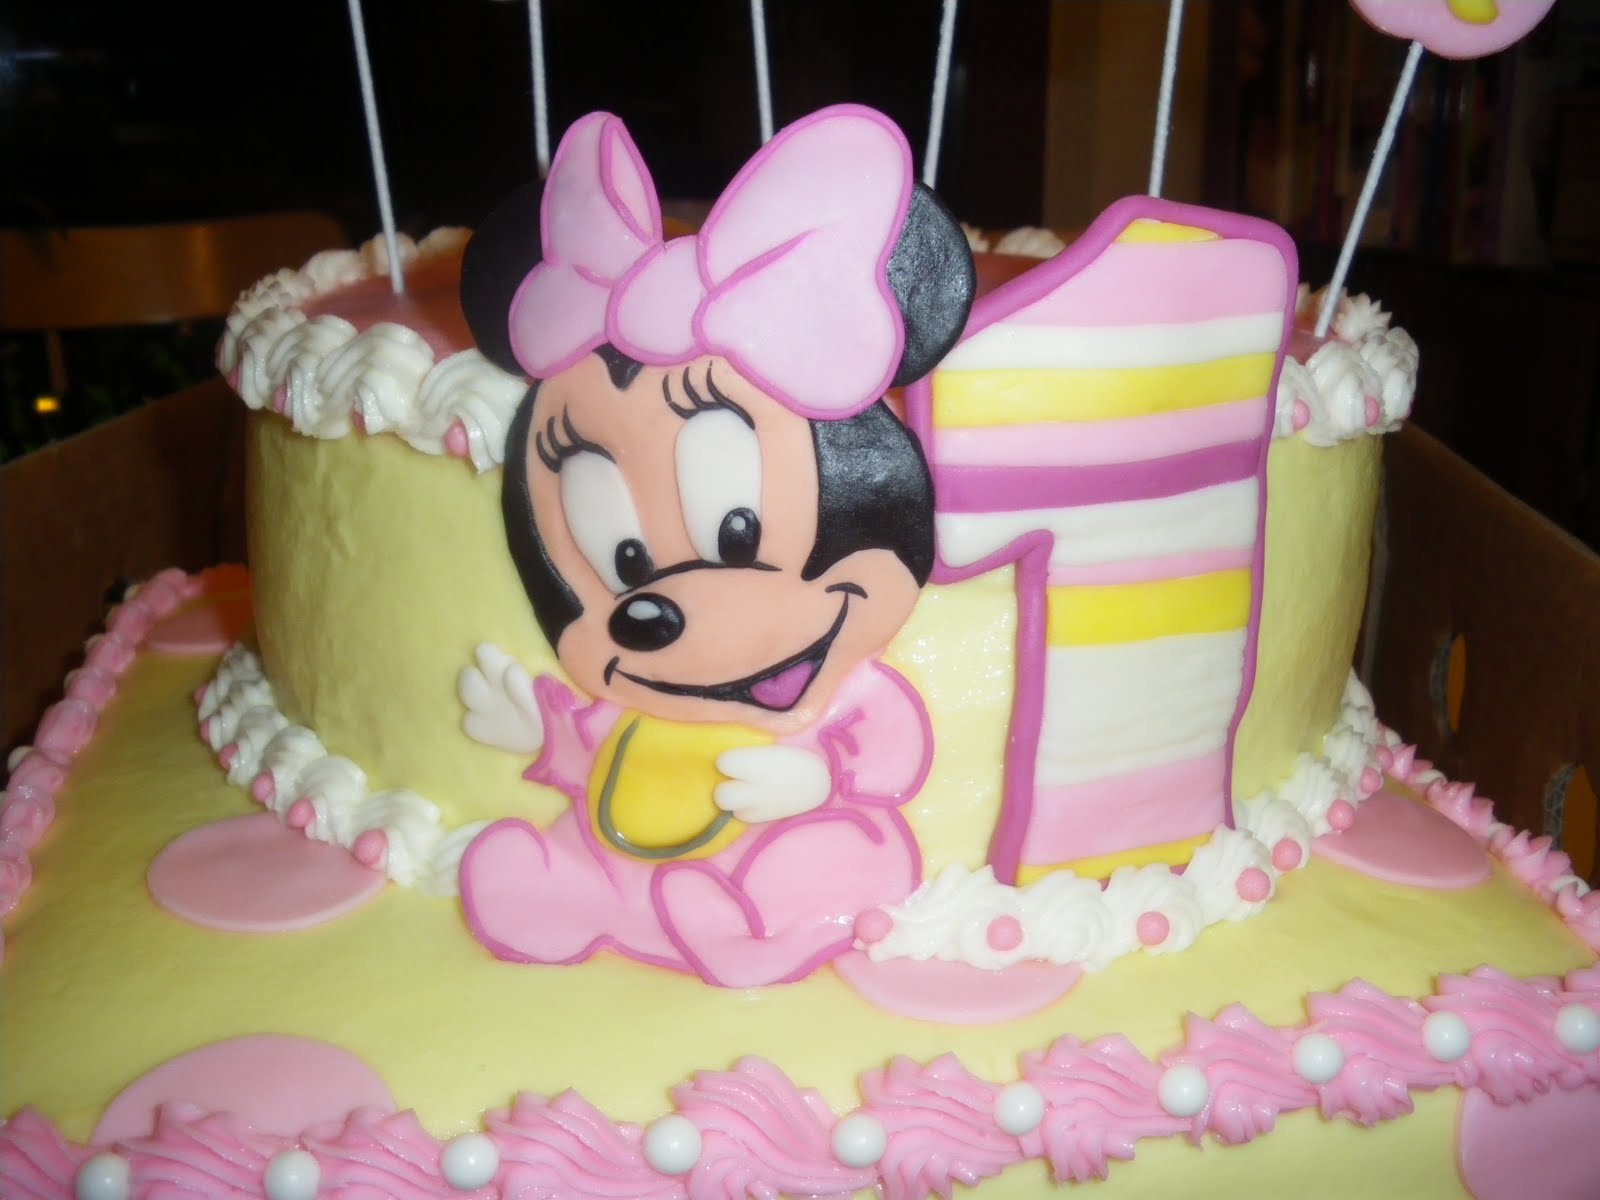 Baby Minnie Mouse primer cumpleaños - Imagui